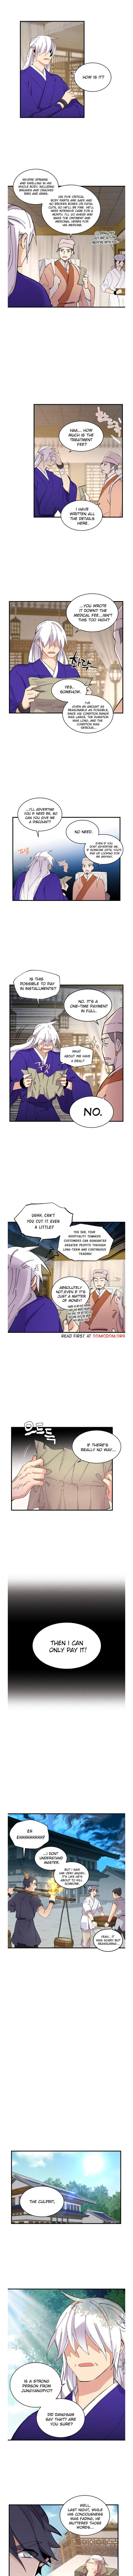 Lightning Degree - Chapter 51 Page 5